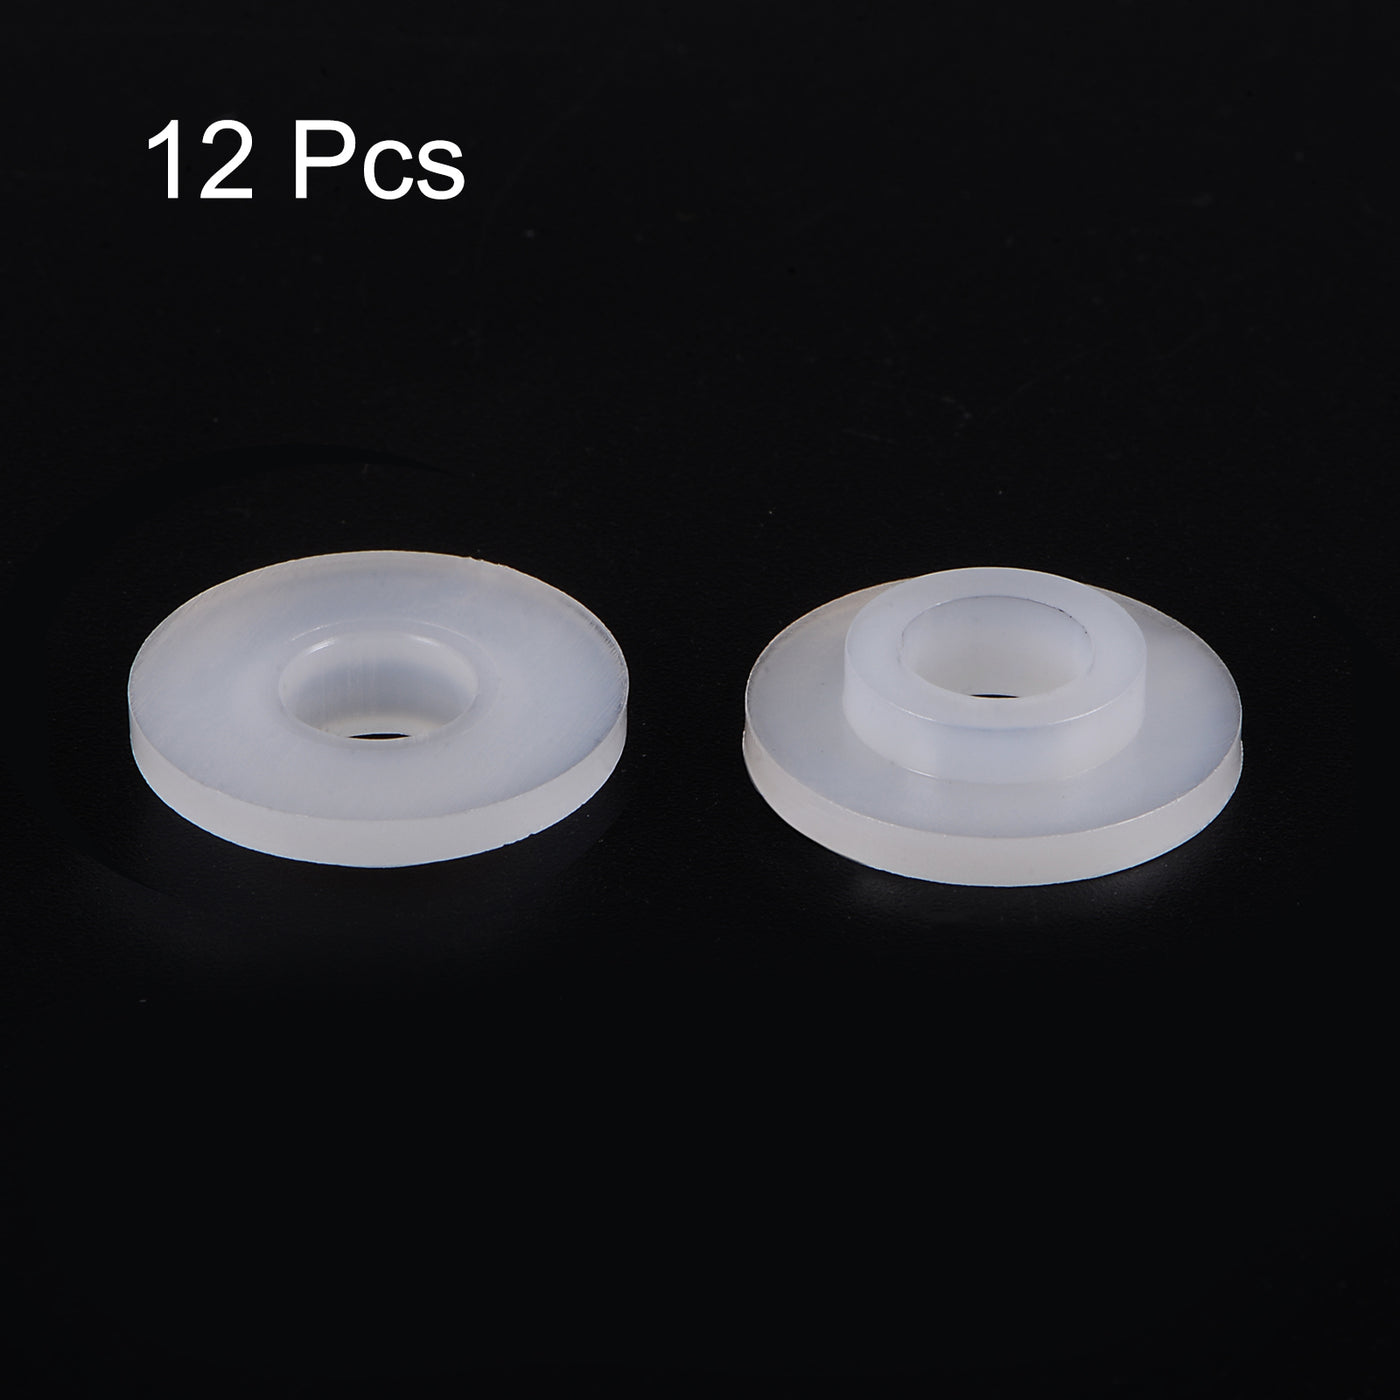 uxcell Uxcell 12pcs Flanged Sleeve Bearings 6.8mm ID 11mm OD 4.5mm Length Nylon Bushing, White